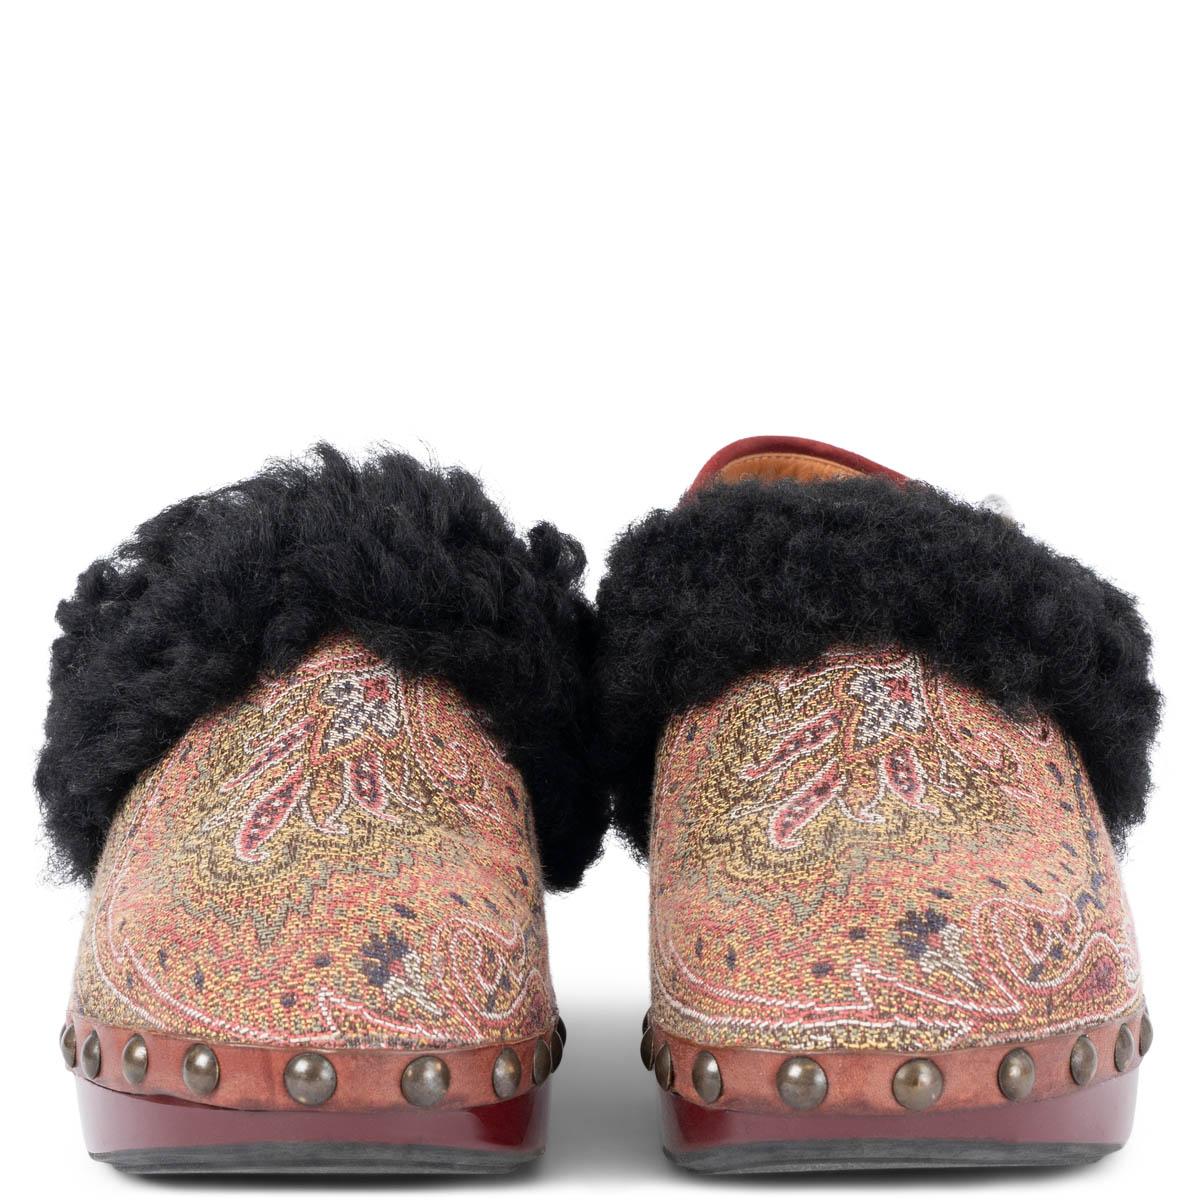 100% authentic Etro clogs in red, brown, yellow and sage green canvas with black rabbit fur trim set on a burgundy wooden sole with suede slingback. Have been worn and are in excellent condition. 

Measurements
Imprinted Size	37
Shoe